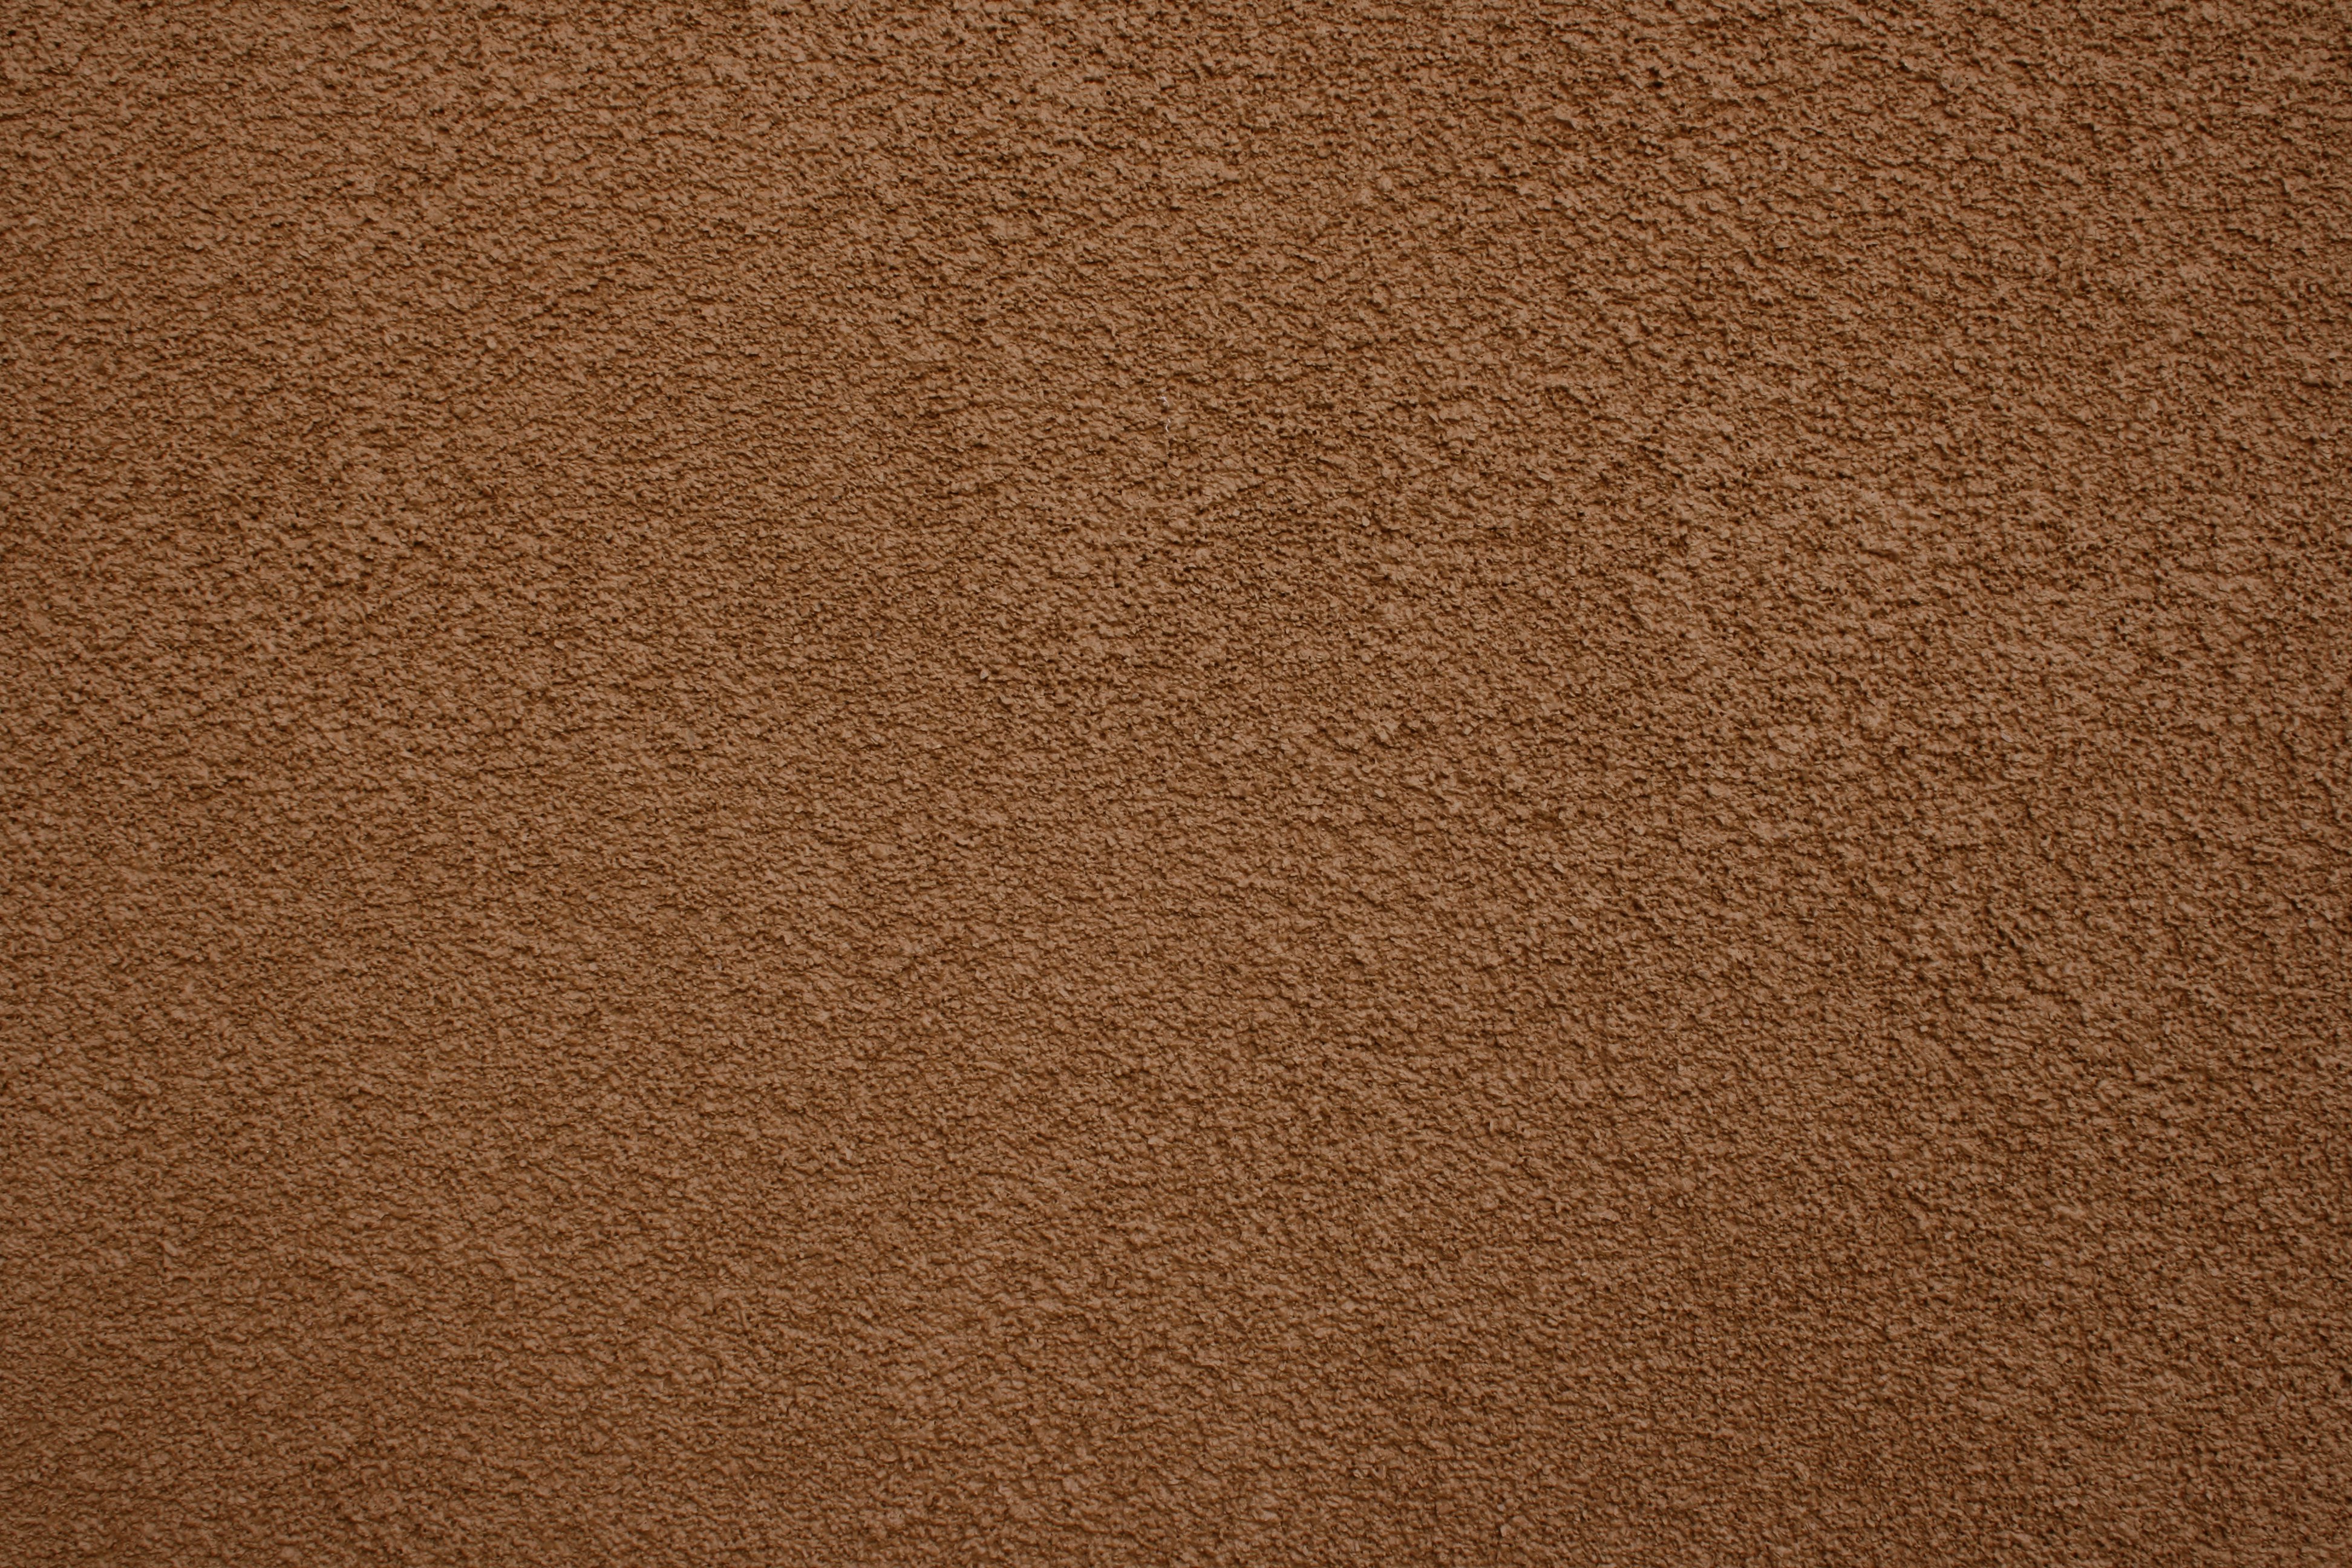 Brown Stucco Wall Texture Picture Free Photograph Photos Public